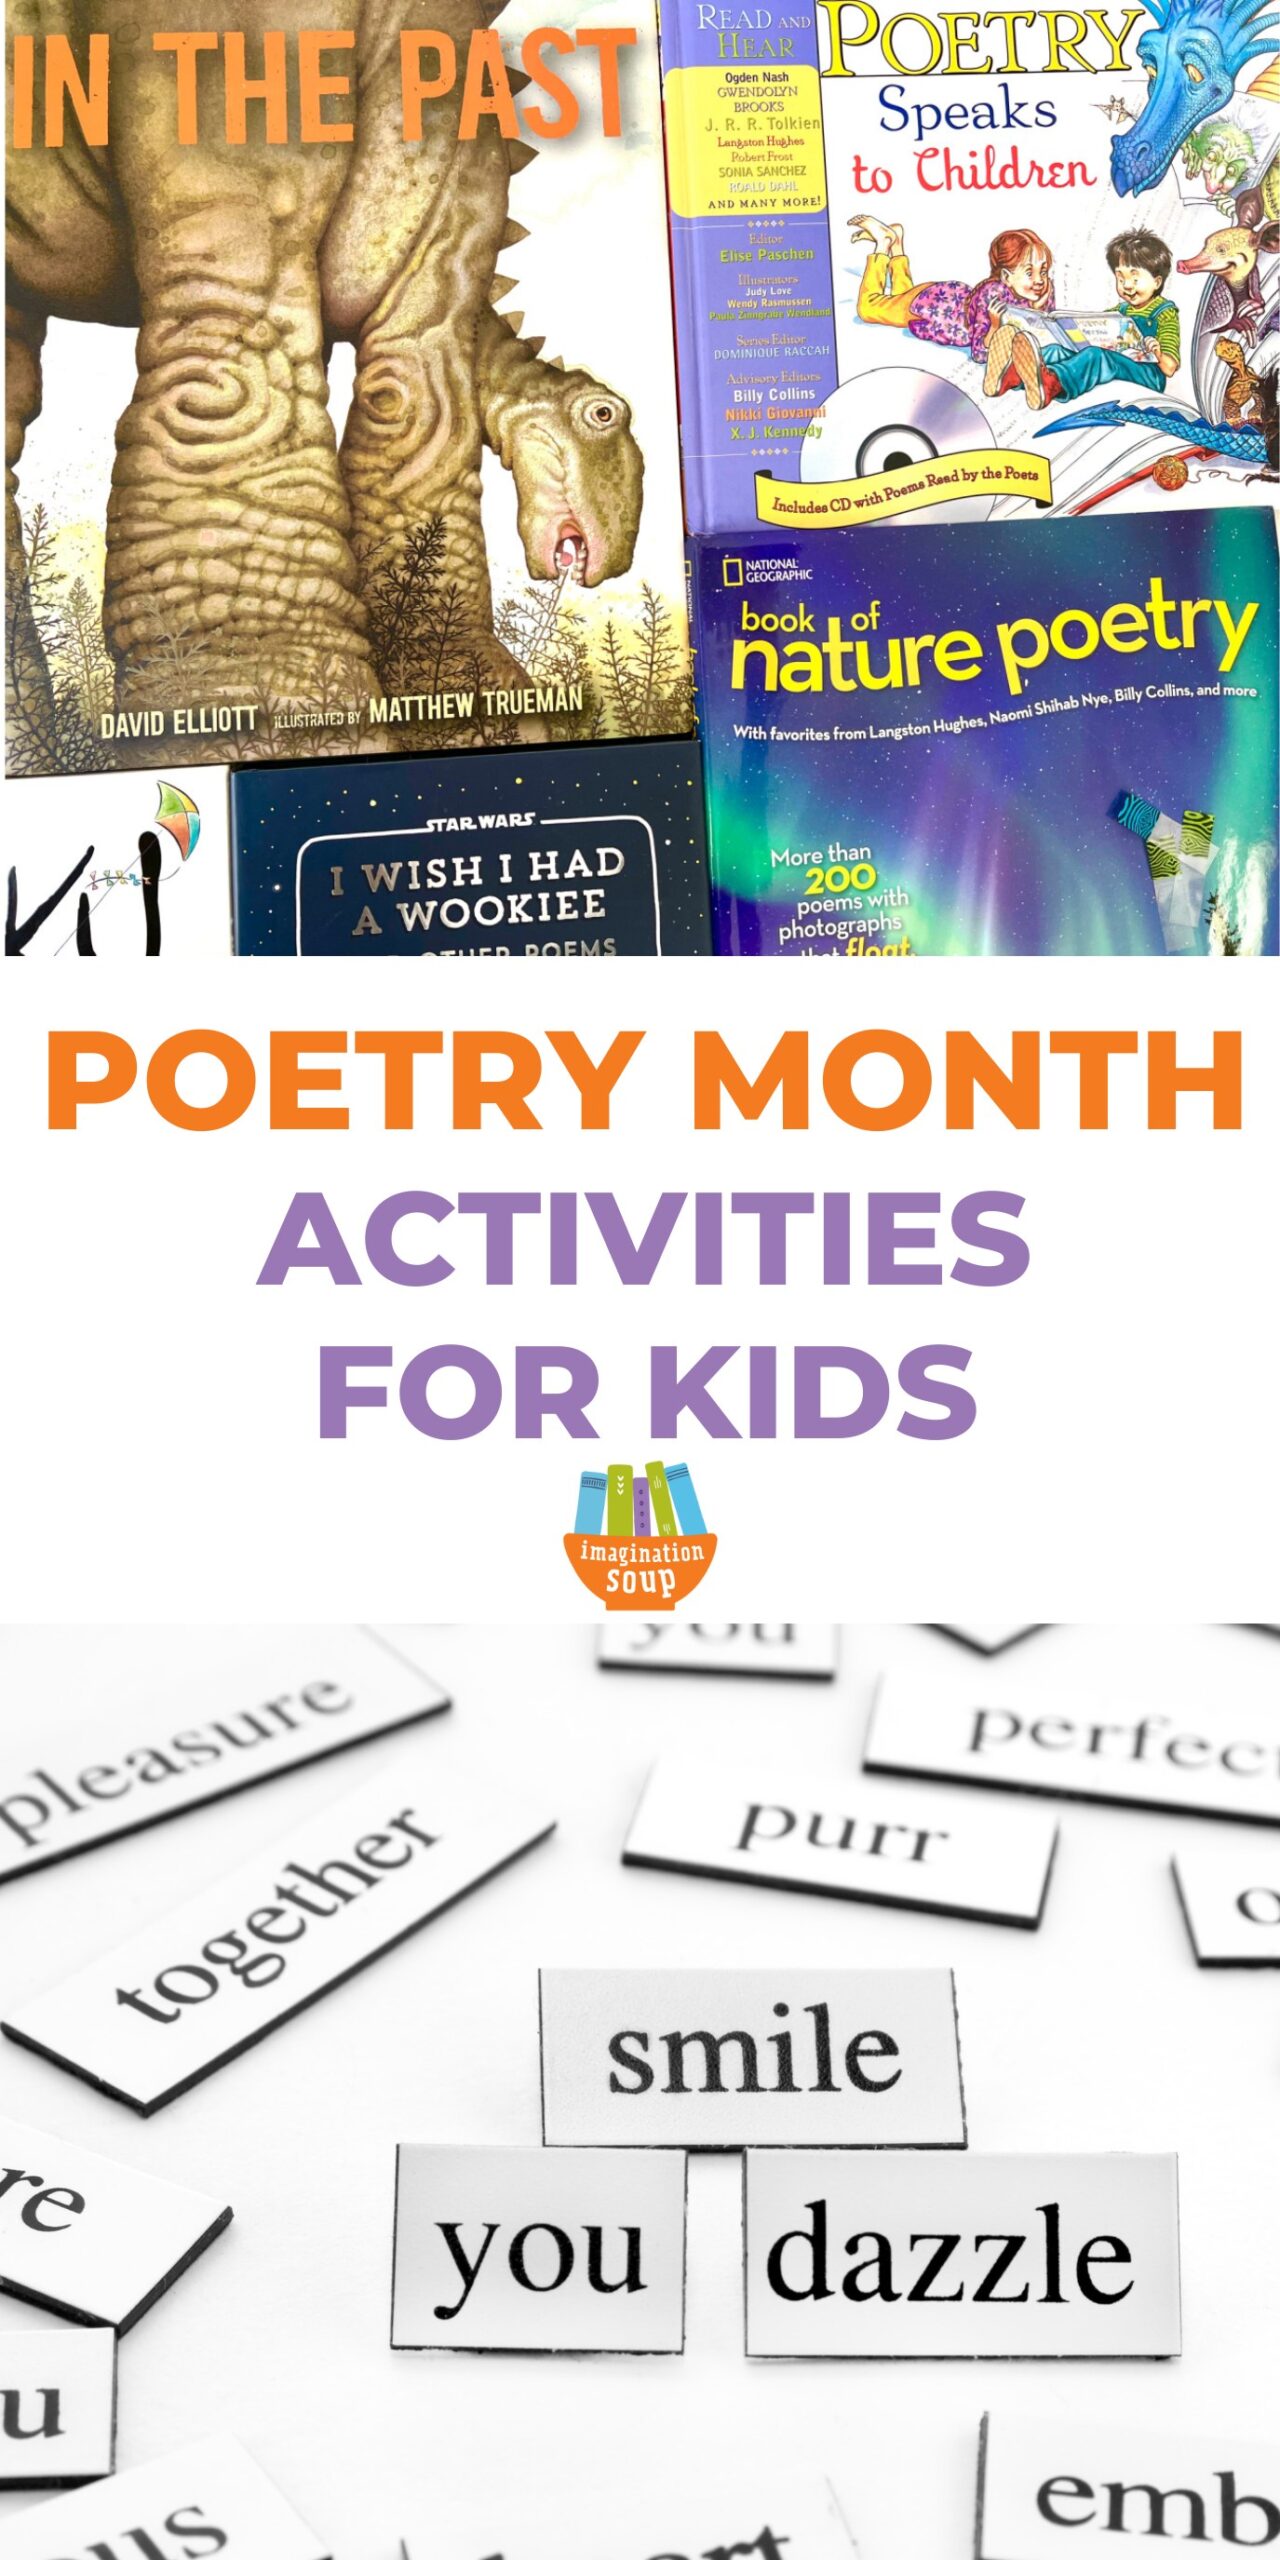 Poetry month is often the time we remember to teach poetry to kids and help our children write poetry. But you can read and write poetry with kids all year long--not just during poetry month!

Elementary teachers love teaching children to write poetry because it's so accessible -- poems are short! The payoff is more immediate than with longer narrative or expository writing. Plus, poetry lends itself to teaching kids about figurative language, voice, sensory images, showing, not telling, and more.